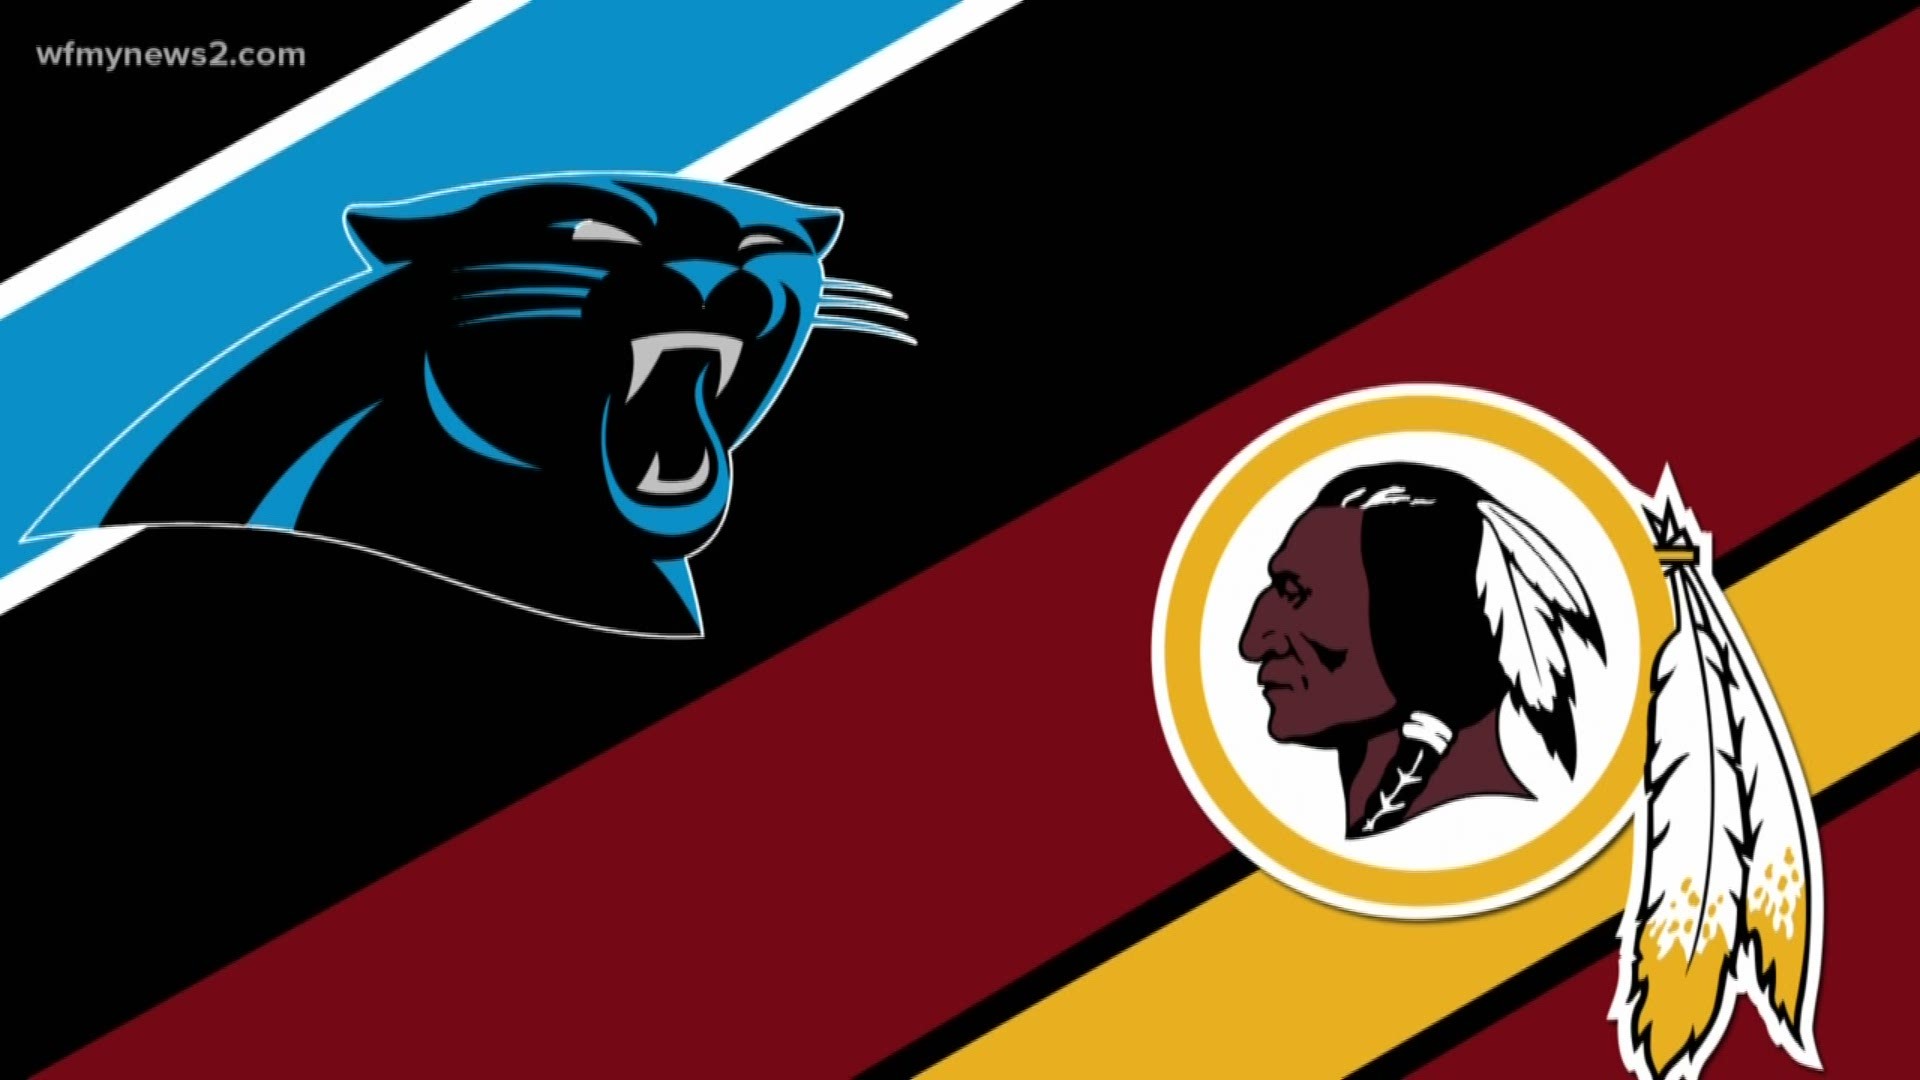 The (5-6) Panthers Look to Snap Their Losing Streak Against the (2-9) Redskins